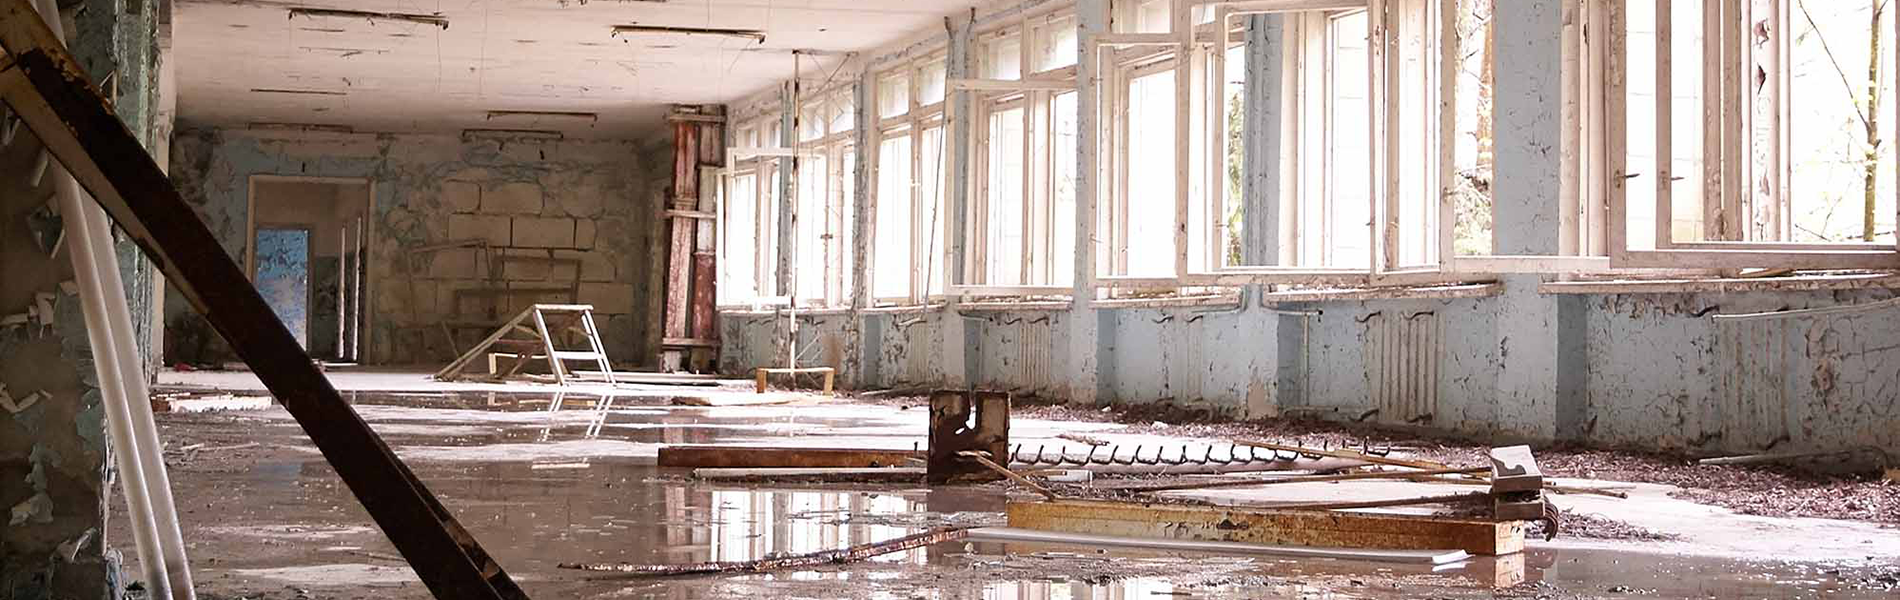 How To Deal With Water Removal And Water Damage Restoration